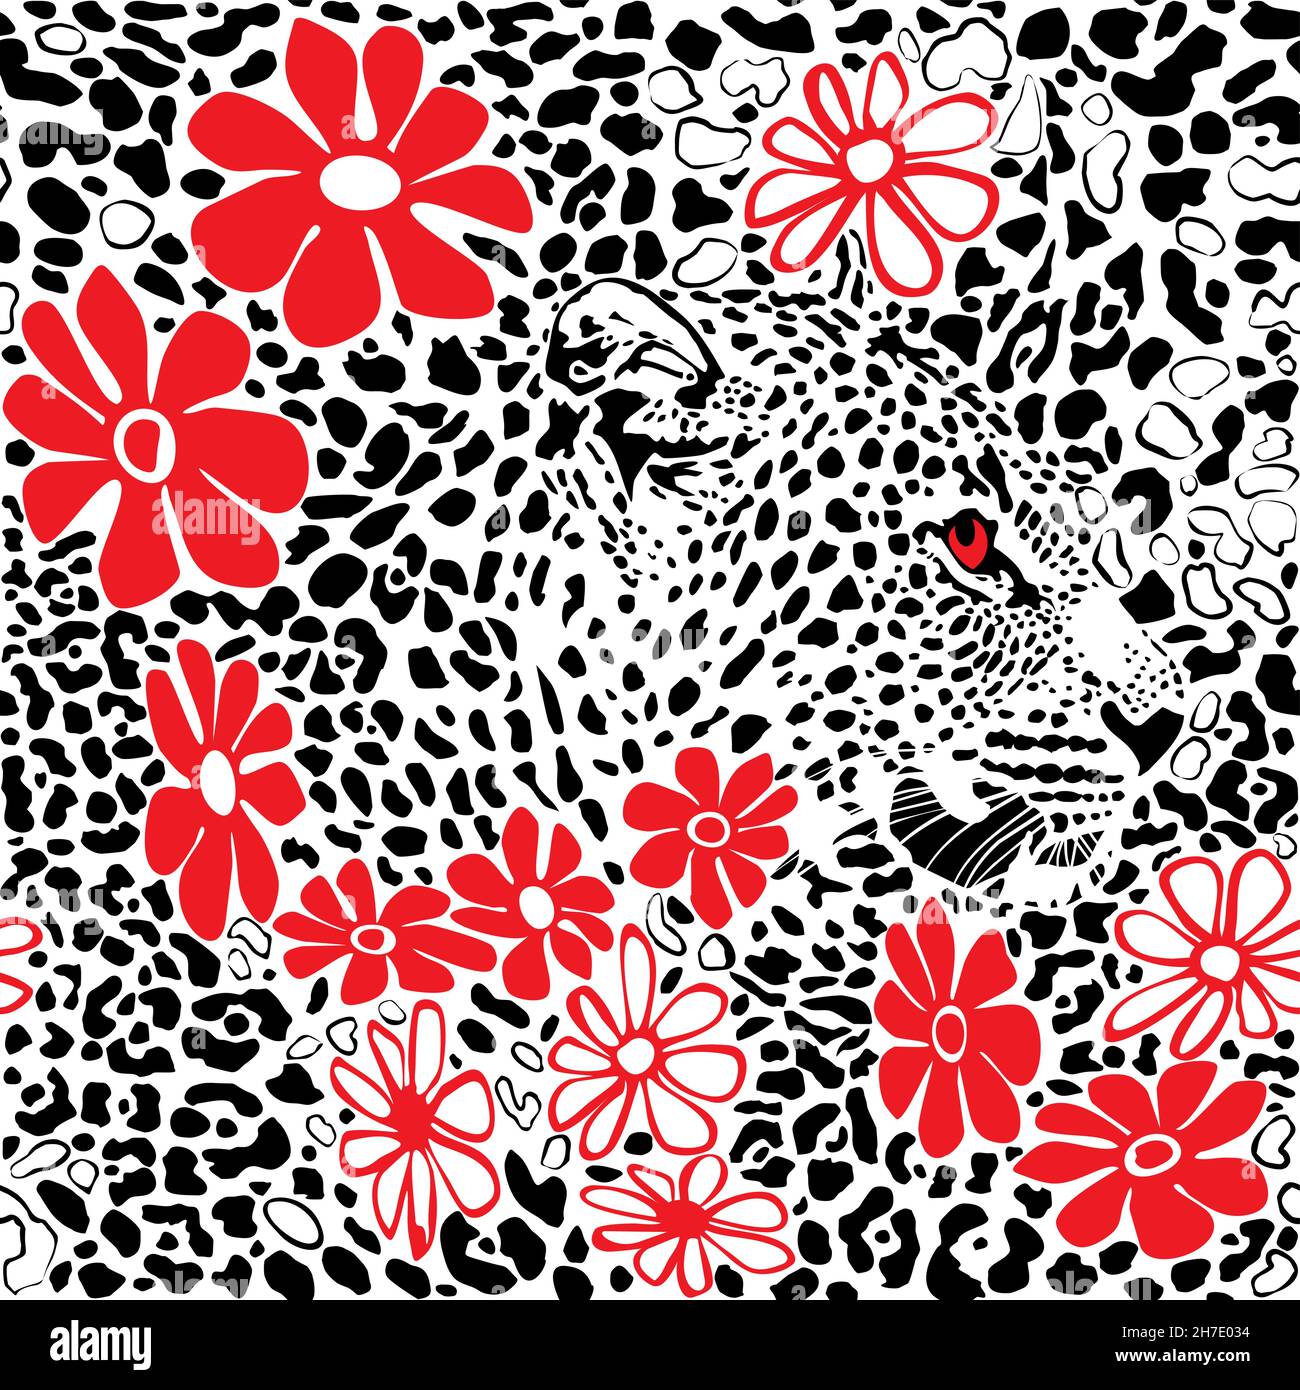 Flover and leopard Stock Vector